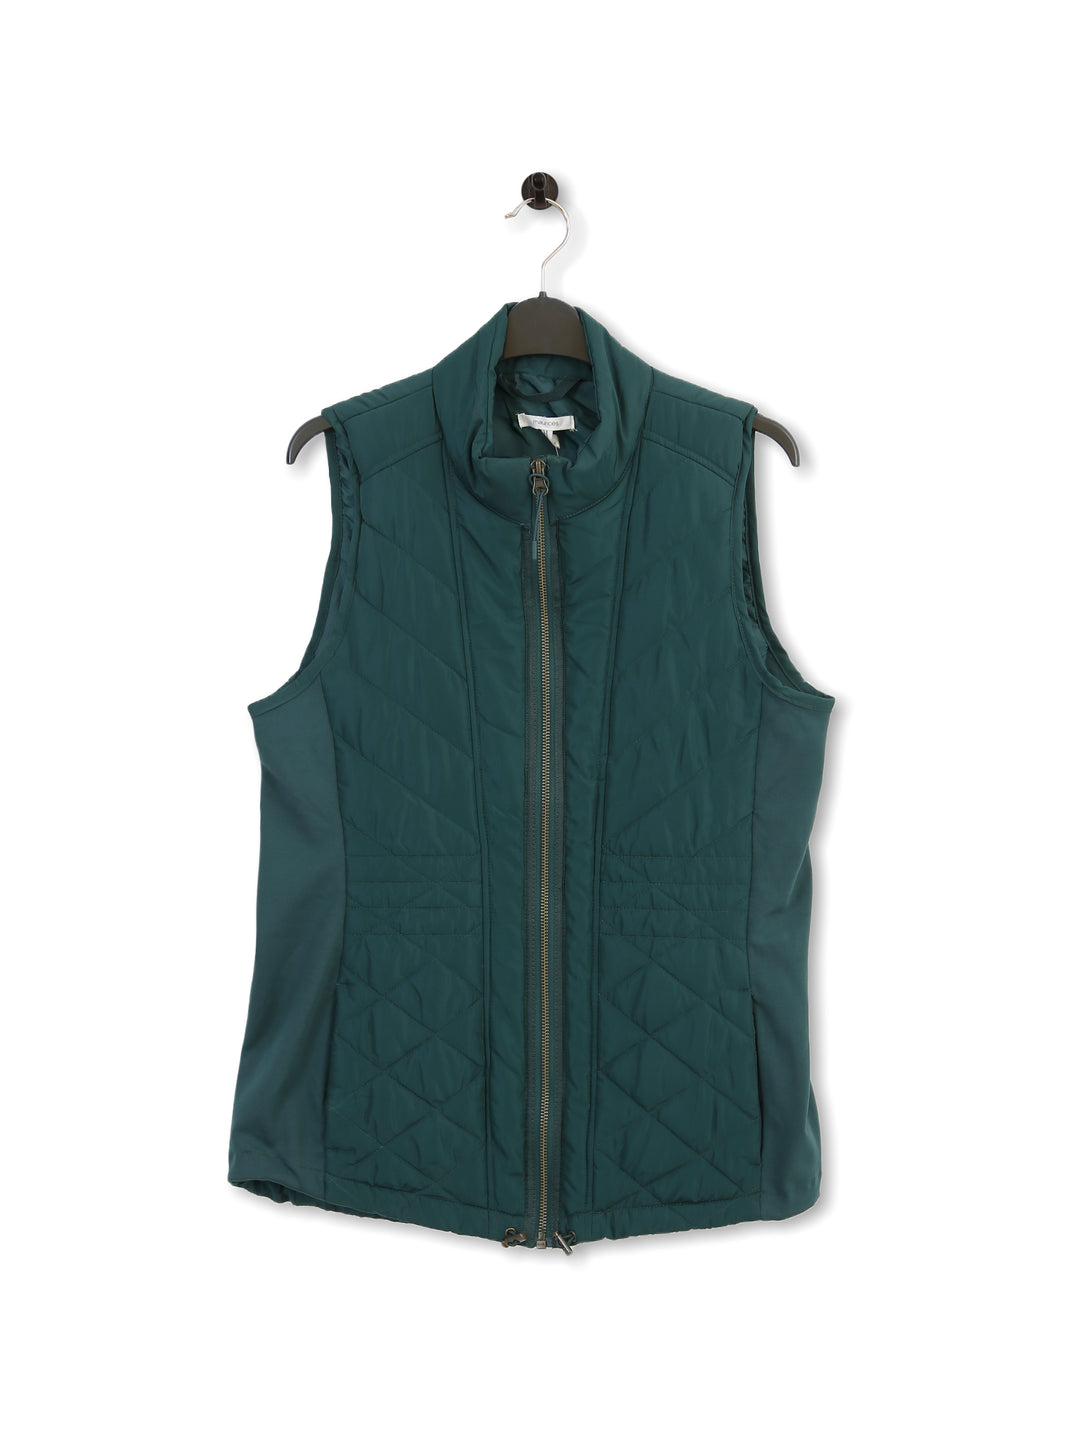 Maurices Ladies Gillet